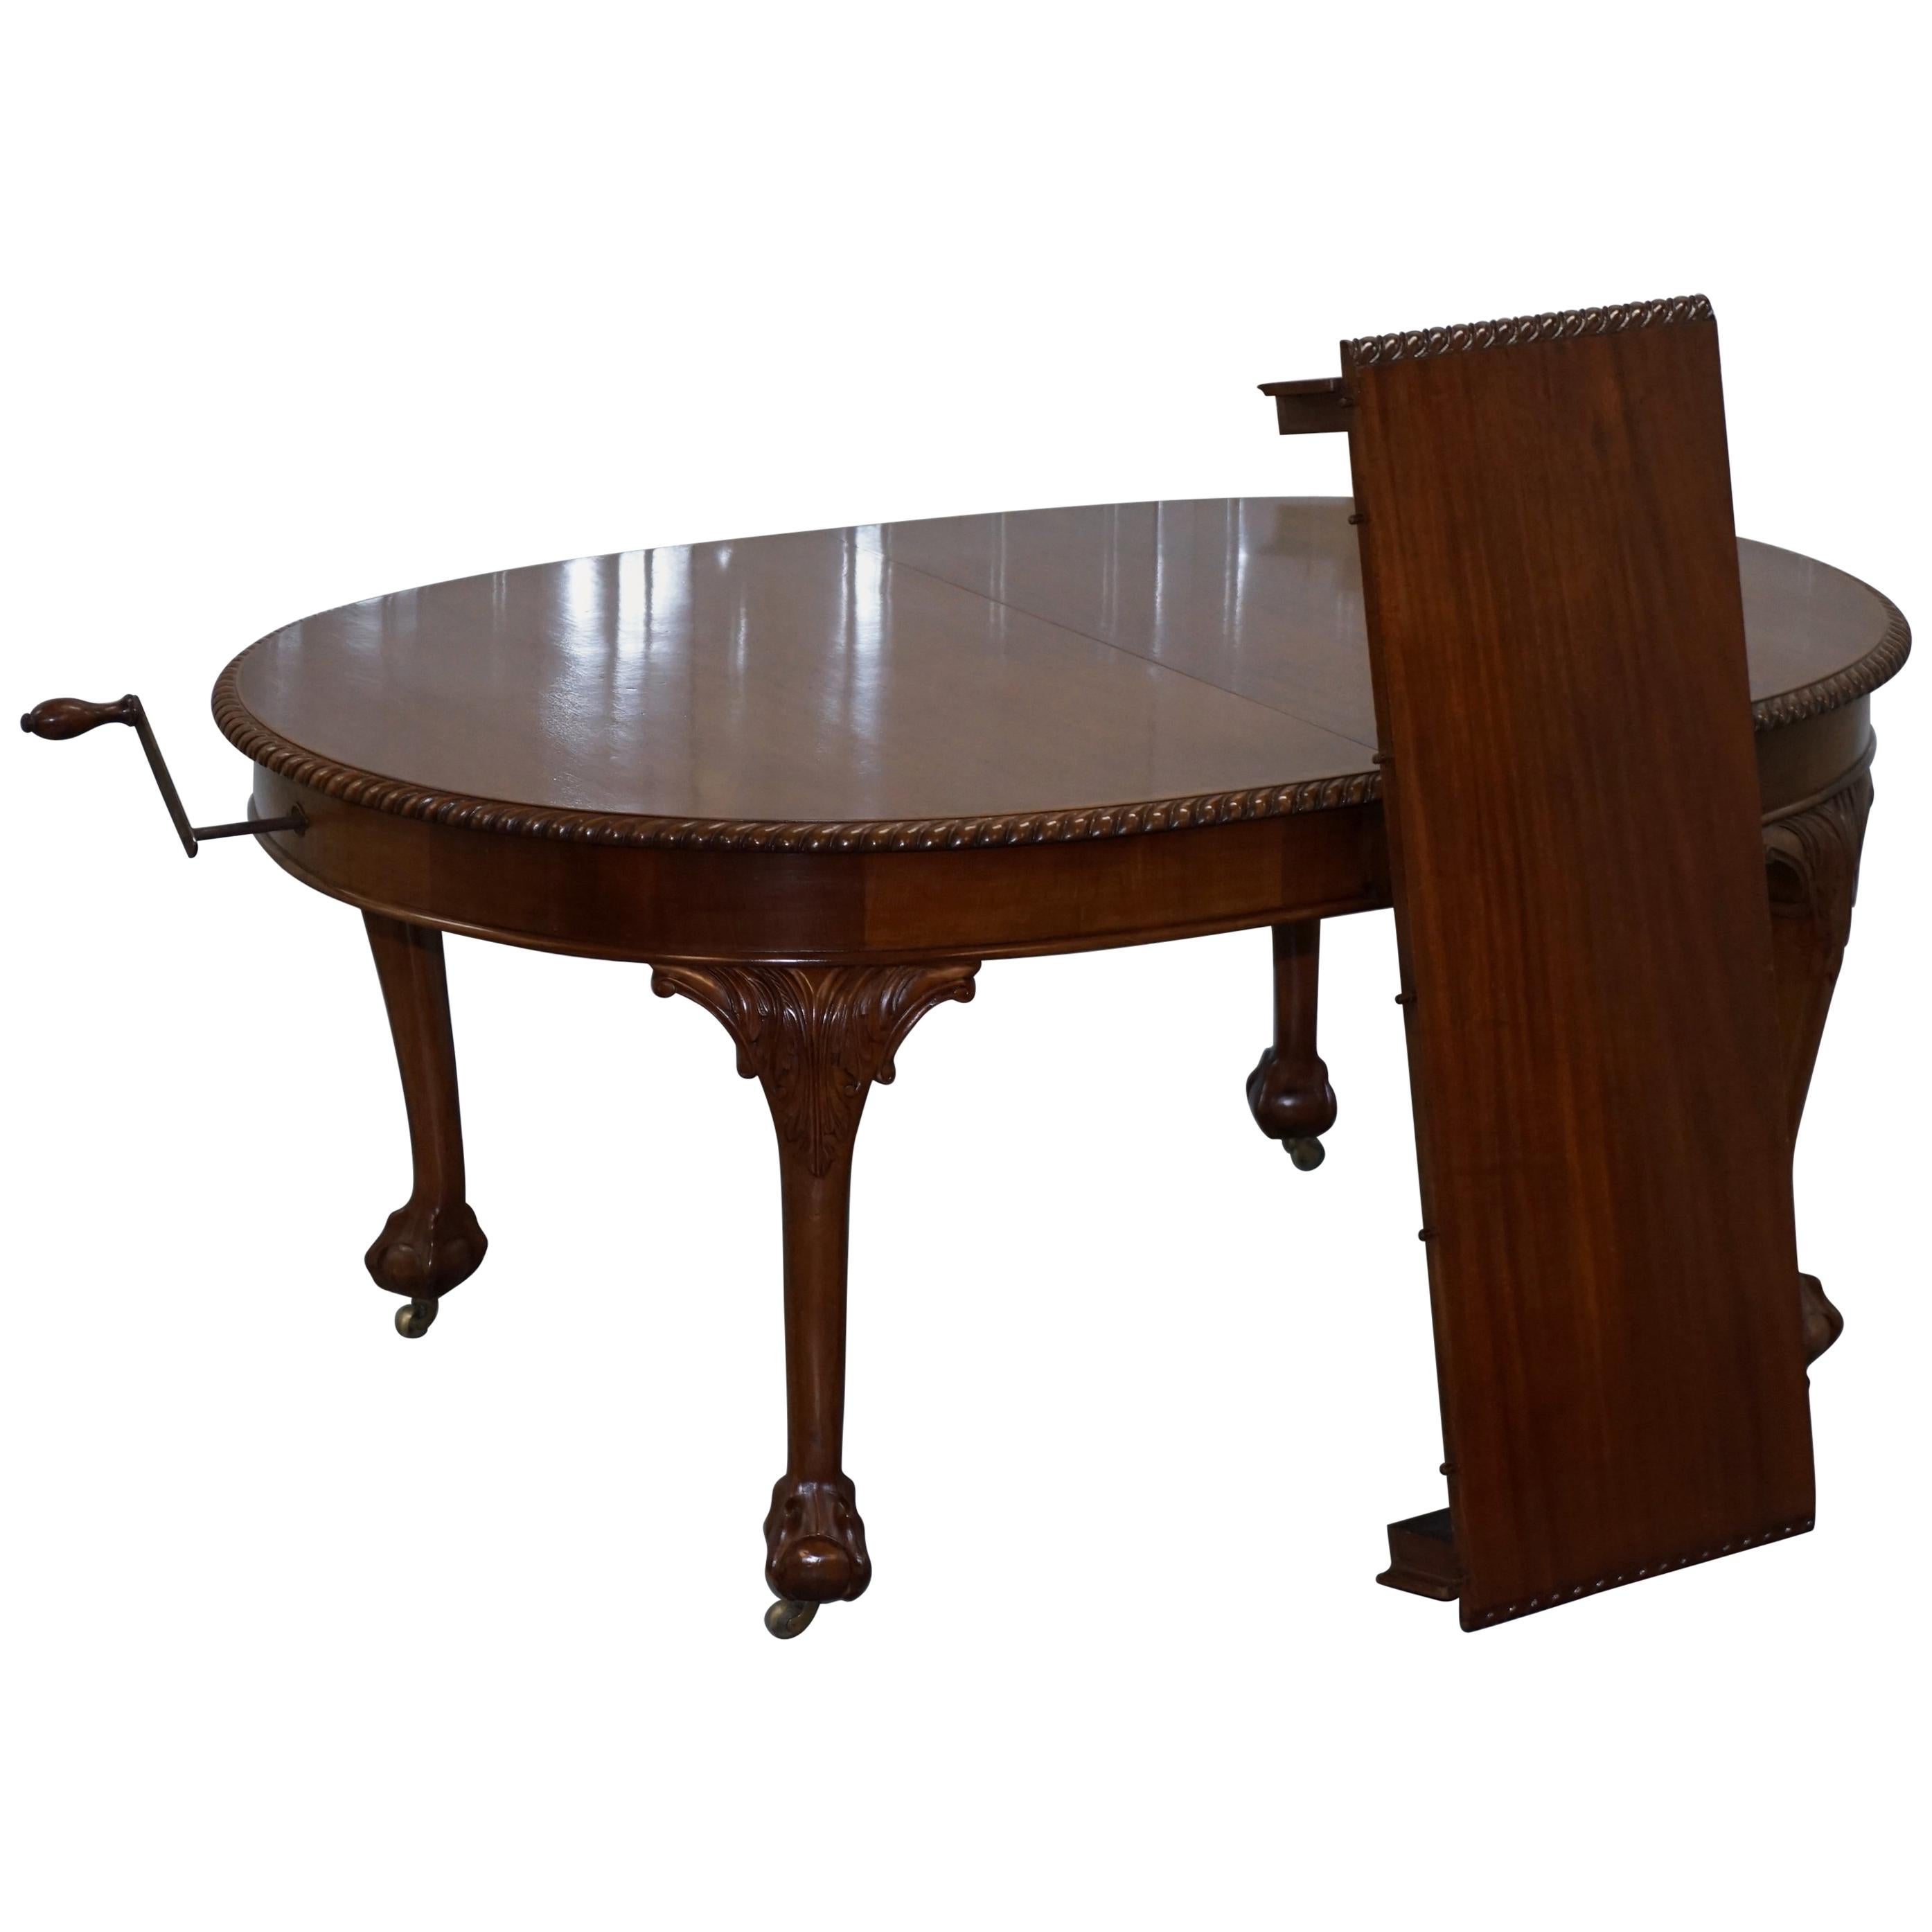 1920s Solid Walnut Extending Dining Table Large Claw and Ball Feet Seats 4 to 8